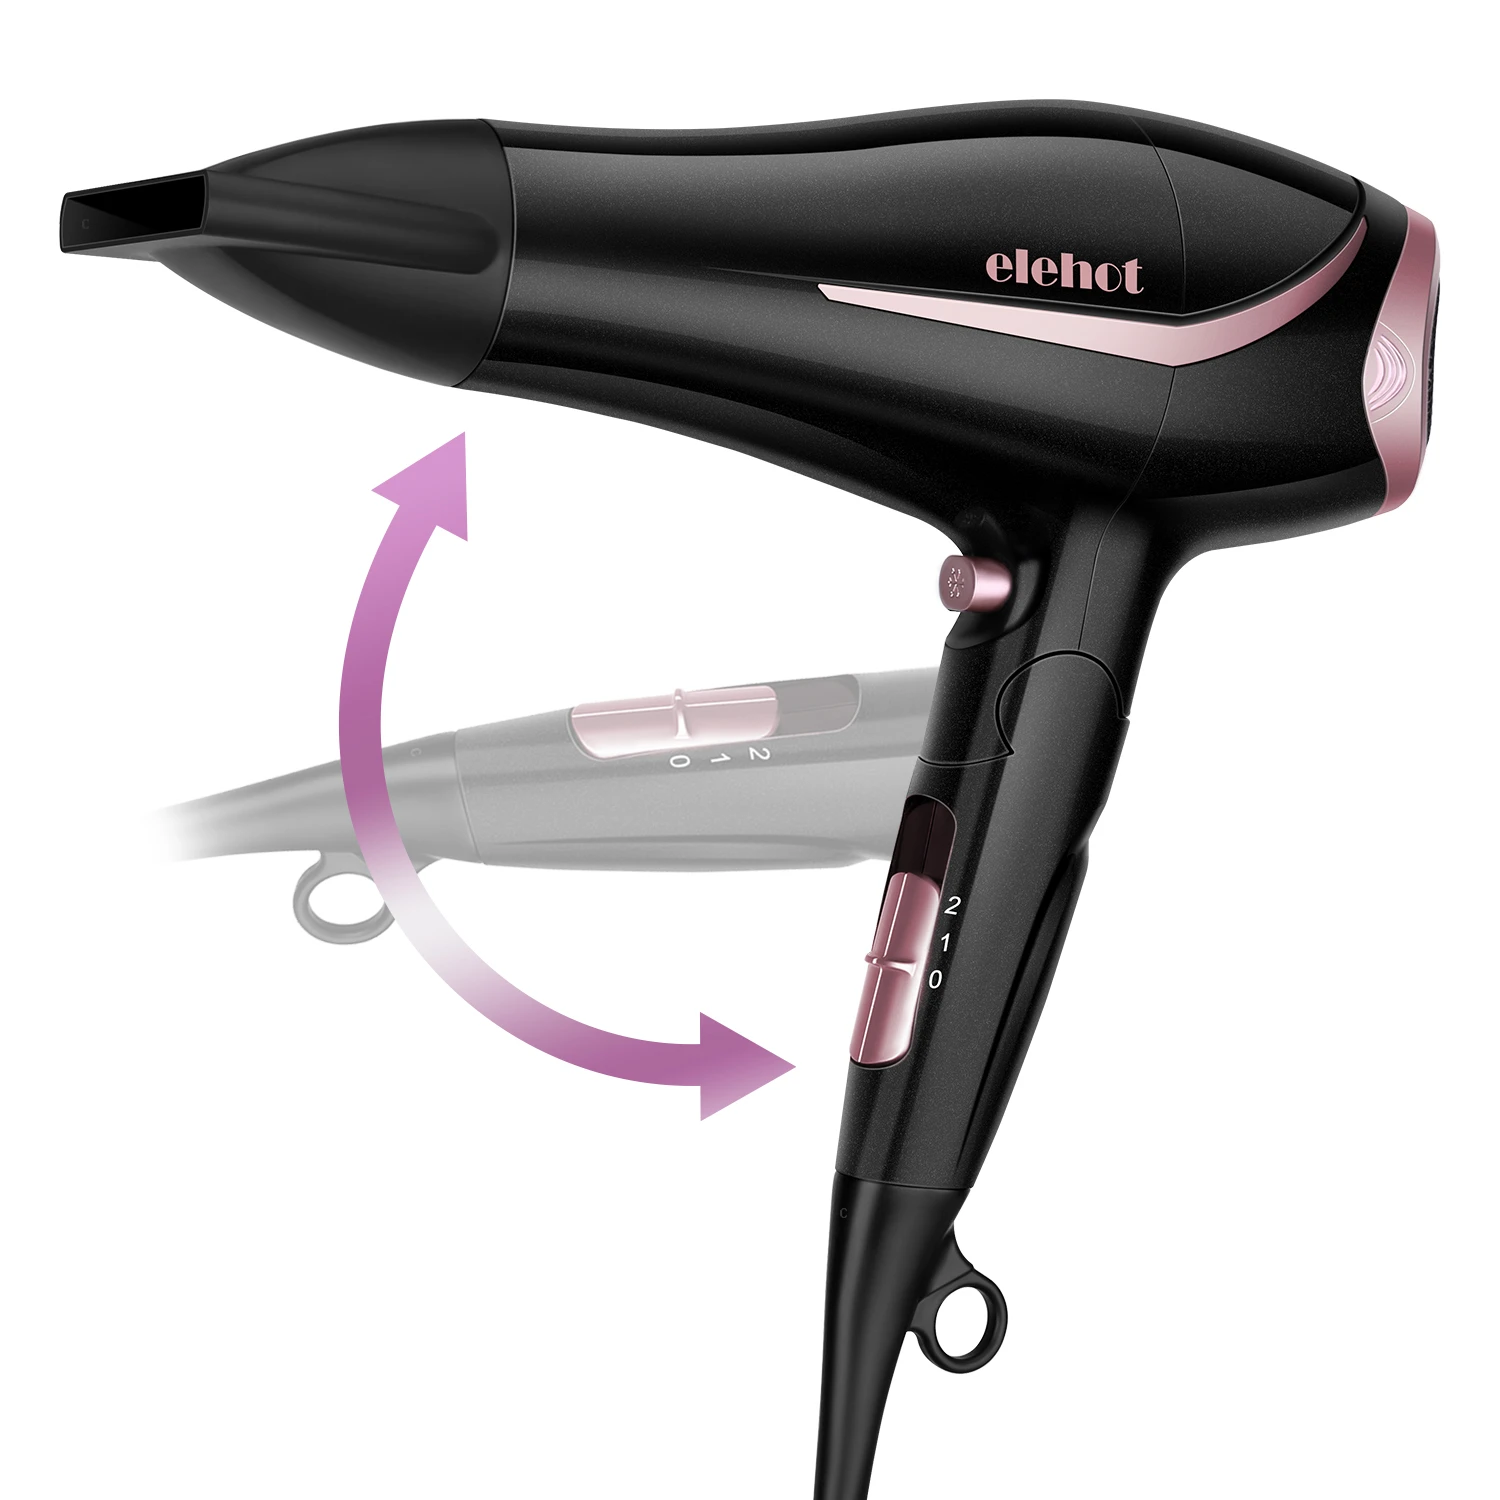 Ionic Hair Dryer Foldable With 3 Temperatures And 2 Speed Setting Blow  Dryer 1800-2200w With 1 Concentrator Nozzle Elehot - Hair Dryers -  AliExpress